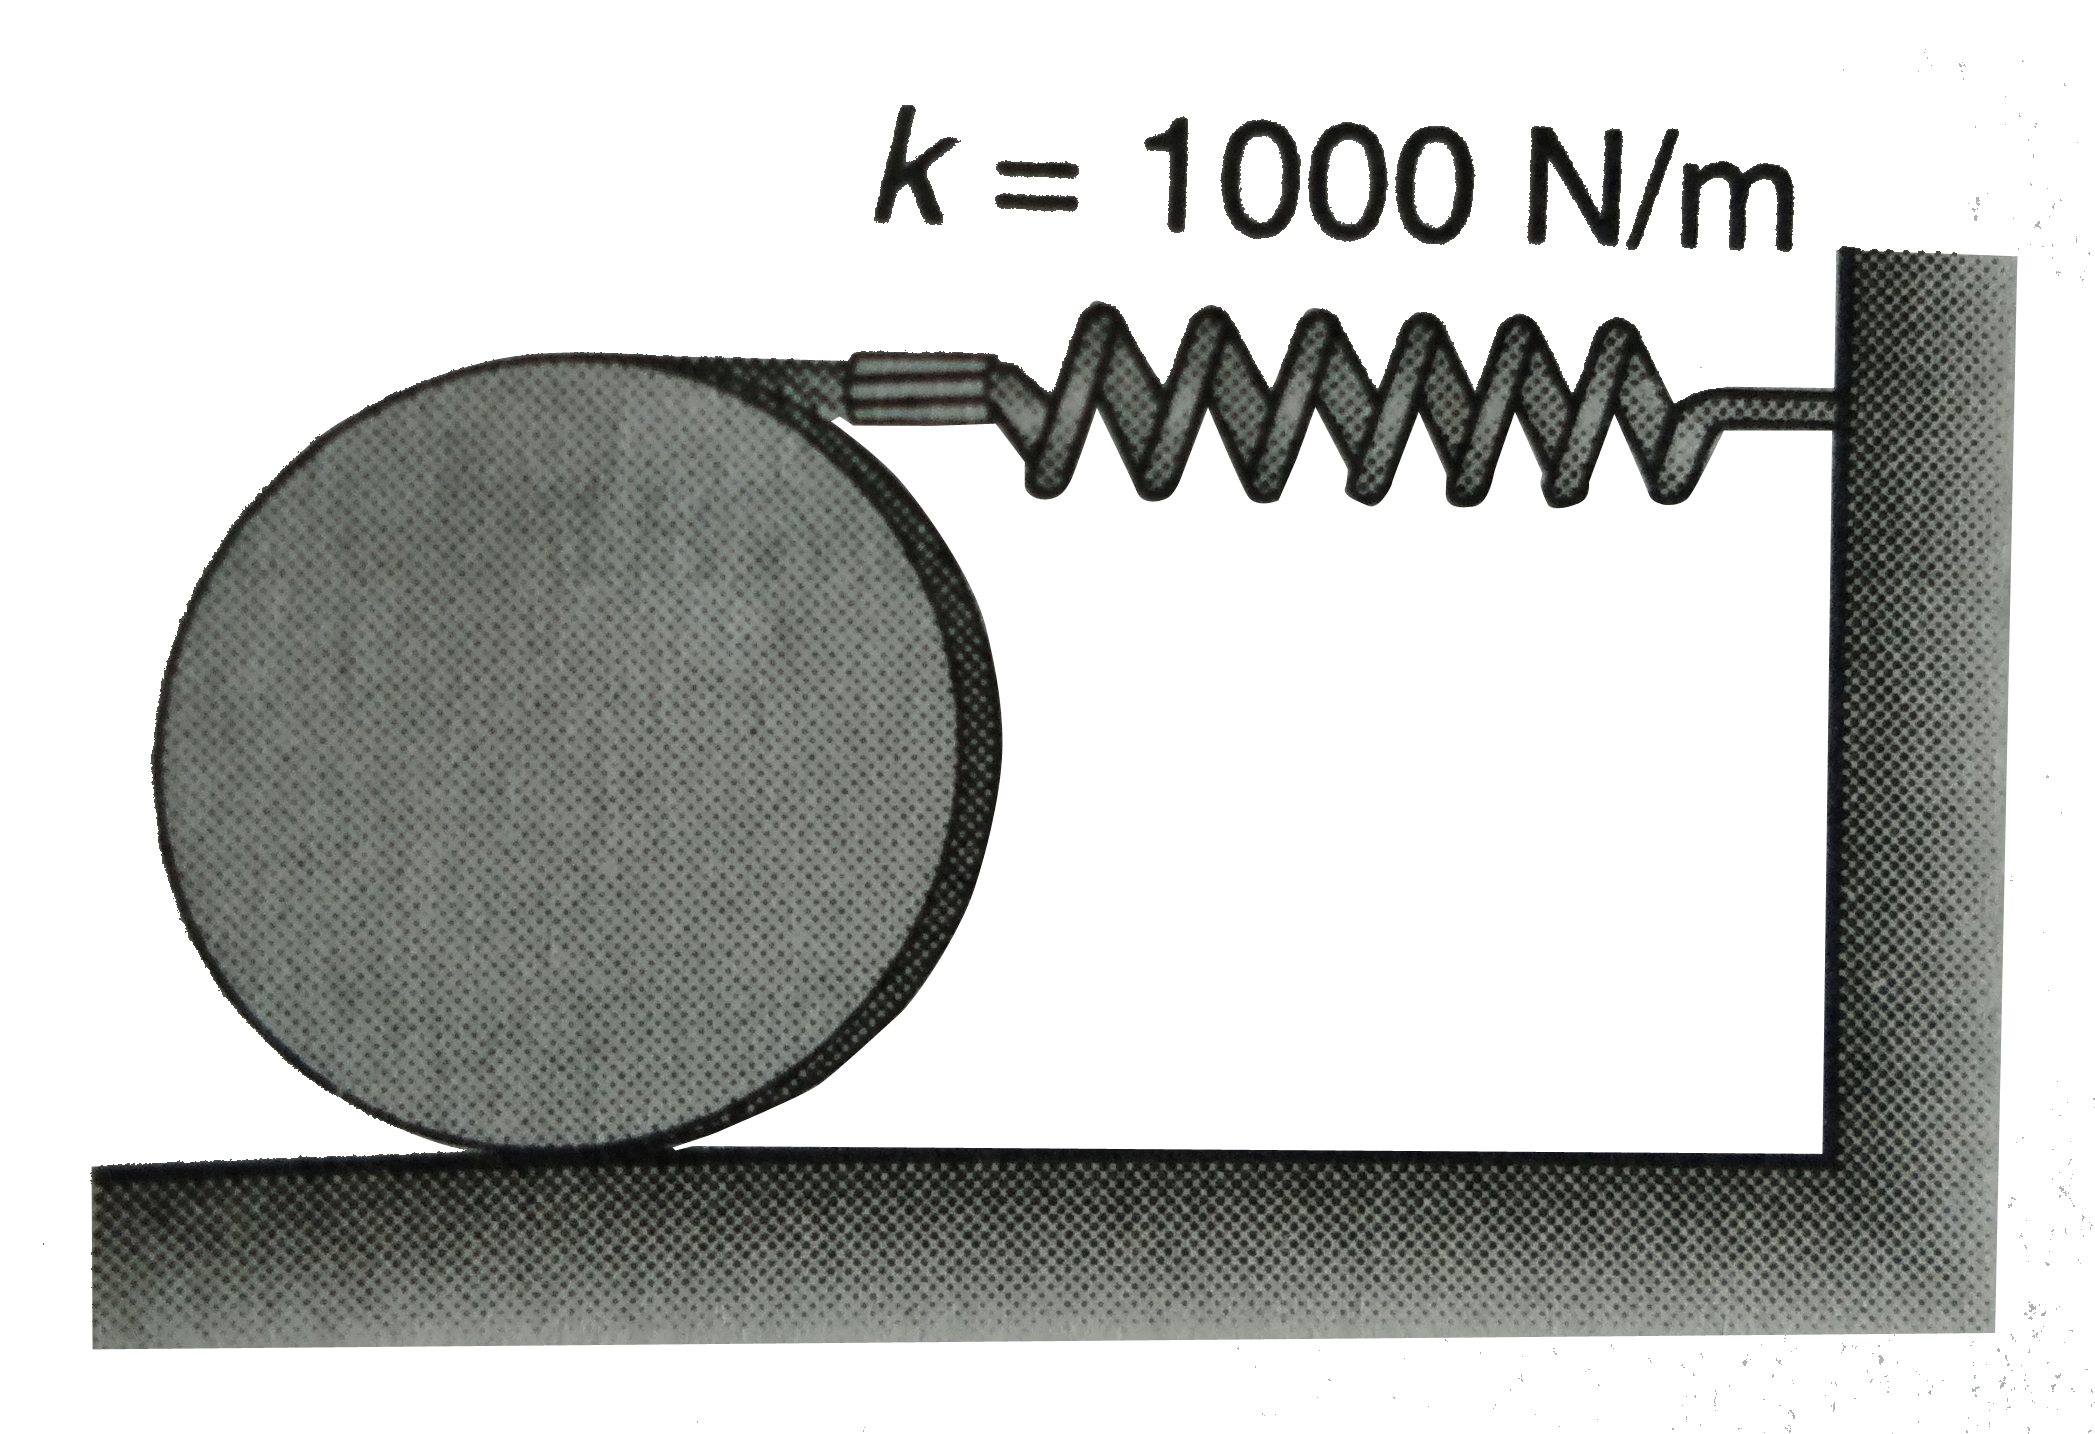 The disk has a weight of 100 Nand rolls without slipping on the horizontal surface as it oscillates about its equilibrium position. If the disk is displaced, by rolling it counterclockwise  0.4rad, determine the equation which describes its oscillatory motion when it is released.